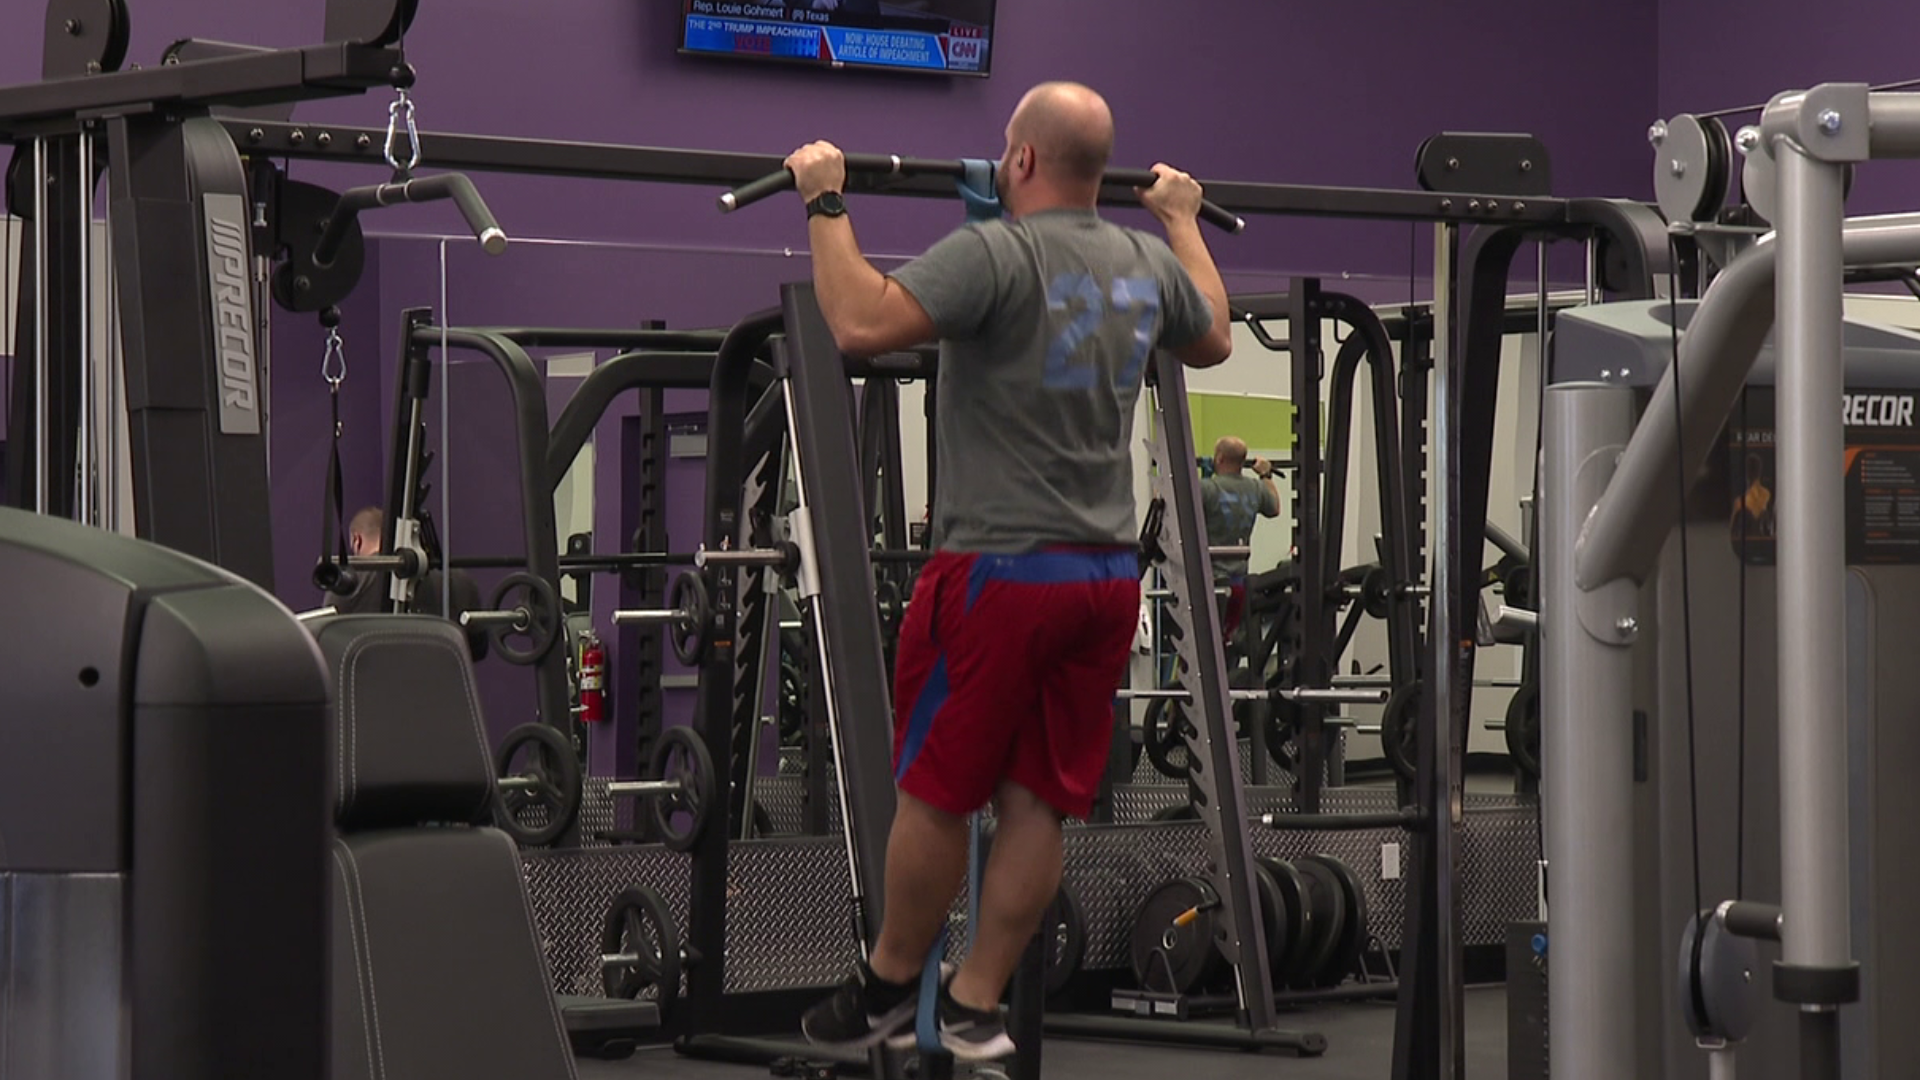 While many gyms are closing their doors for good, others are opening them for the first time, like Anytime Fitness in Wyoming.